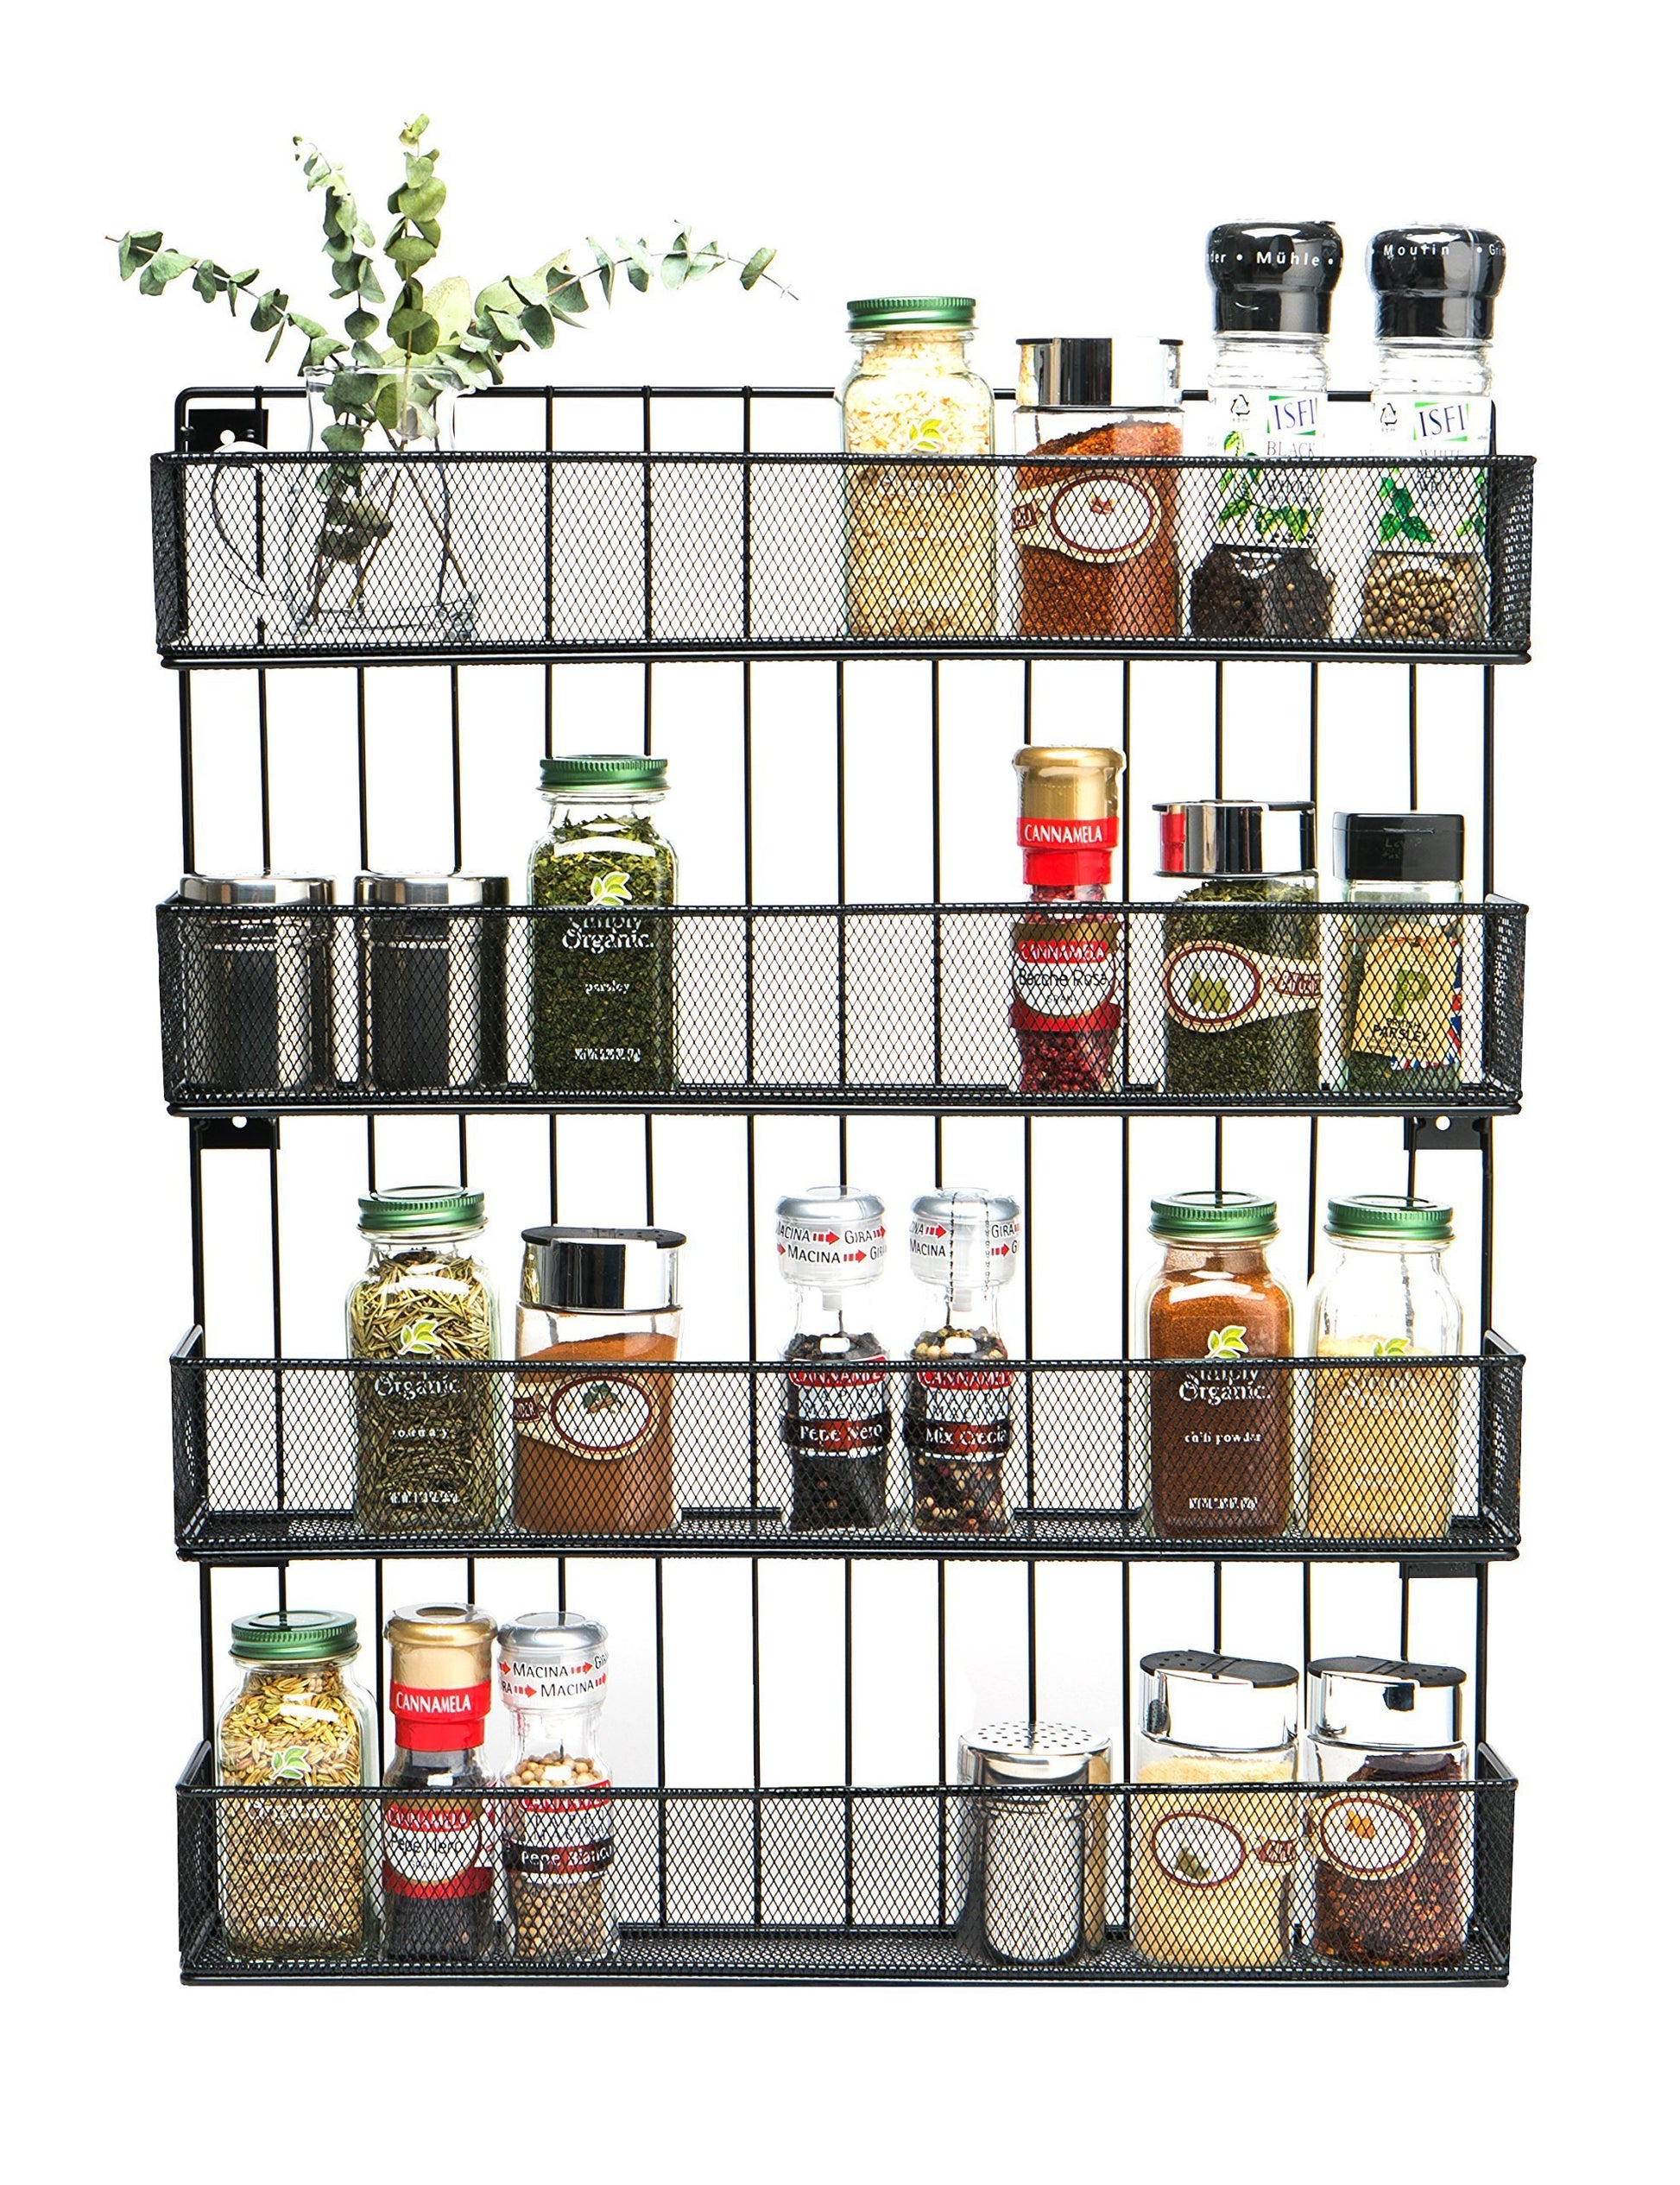 Explore jackcubedesign wall mount spice rack 4 tier kitchen countertop worktop display organizer spice bottles holder stand shelves17 6 x 2 8 x 20 8 inches mk418a